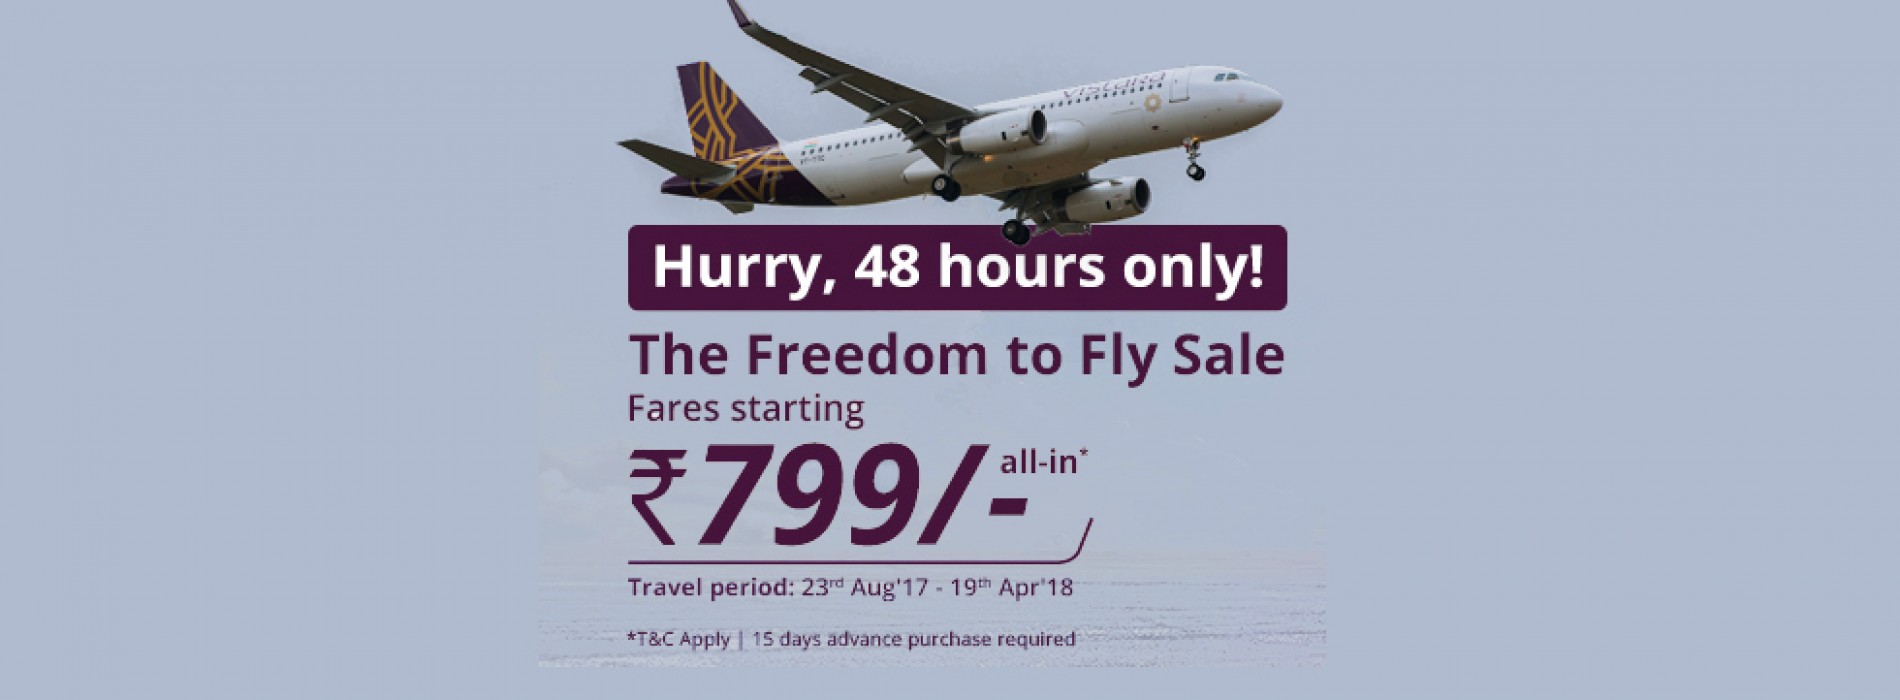 Vistara’s 2-day announces sale, tickets available for as low as Rs 799